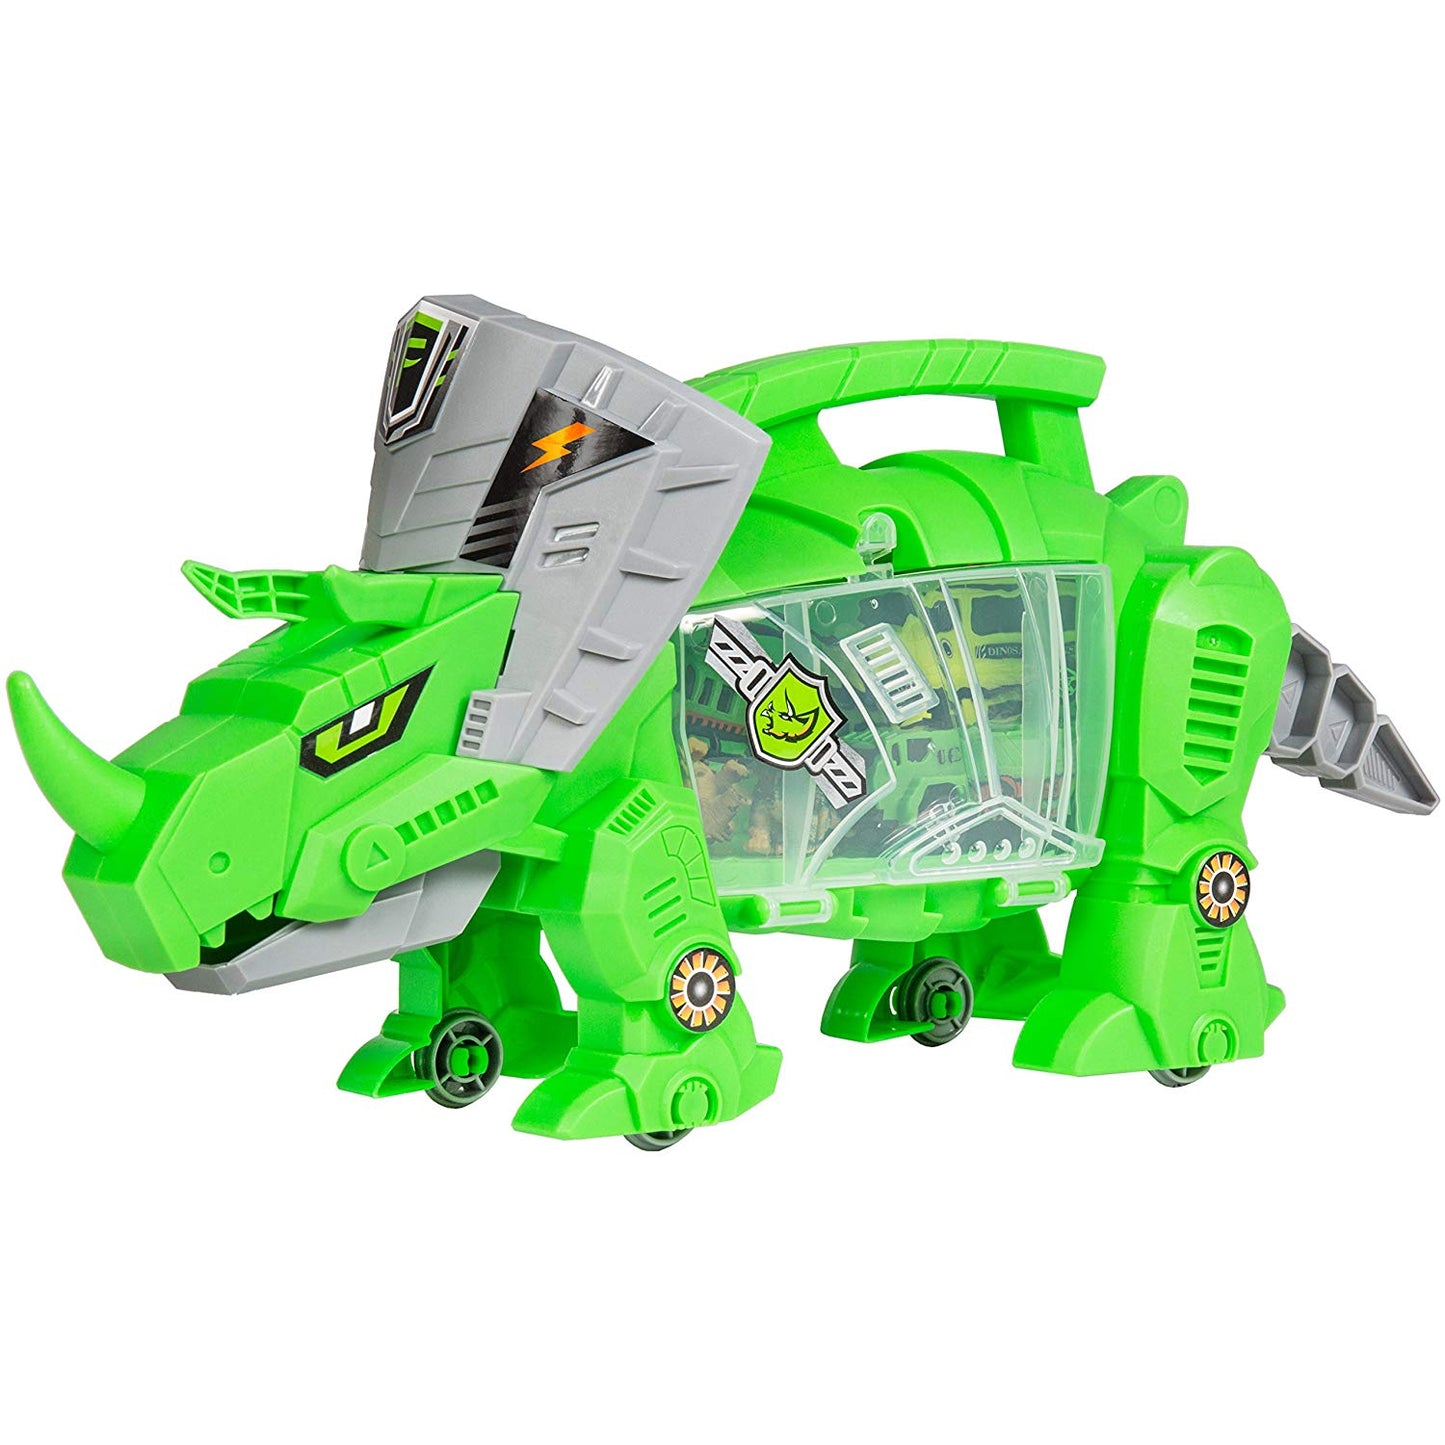 Kids Triceratops Toy Car Carrier Holder w/ Carrying Handle, Wheels, 4 Vehicles, 4 Dinosaurs - Green